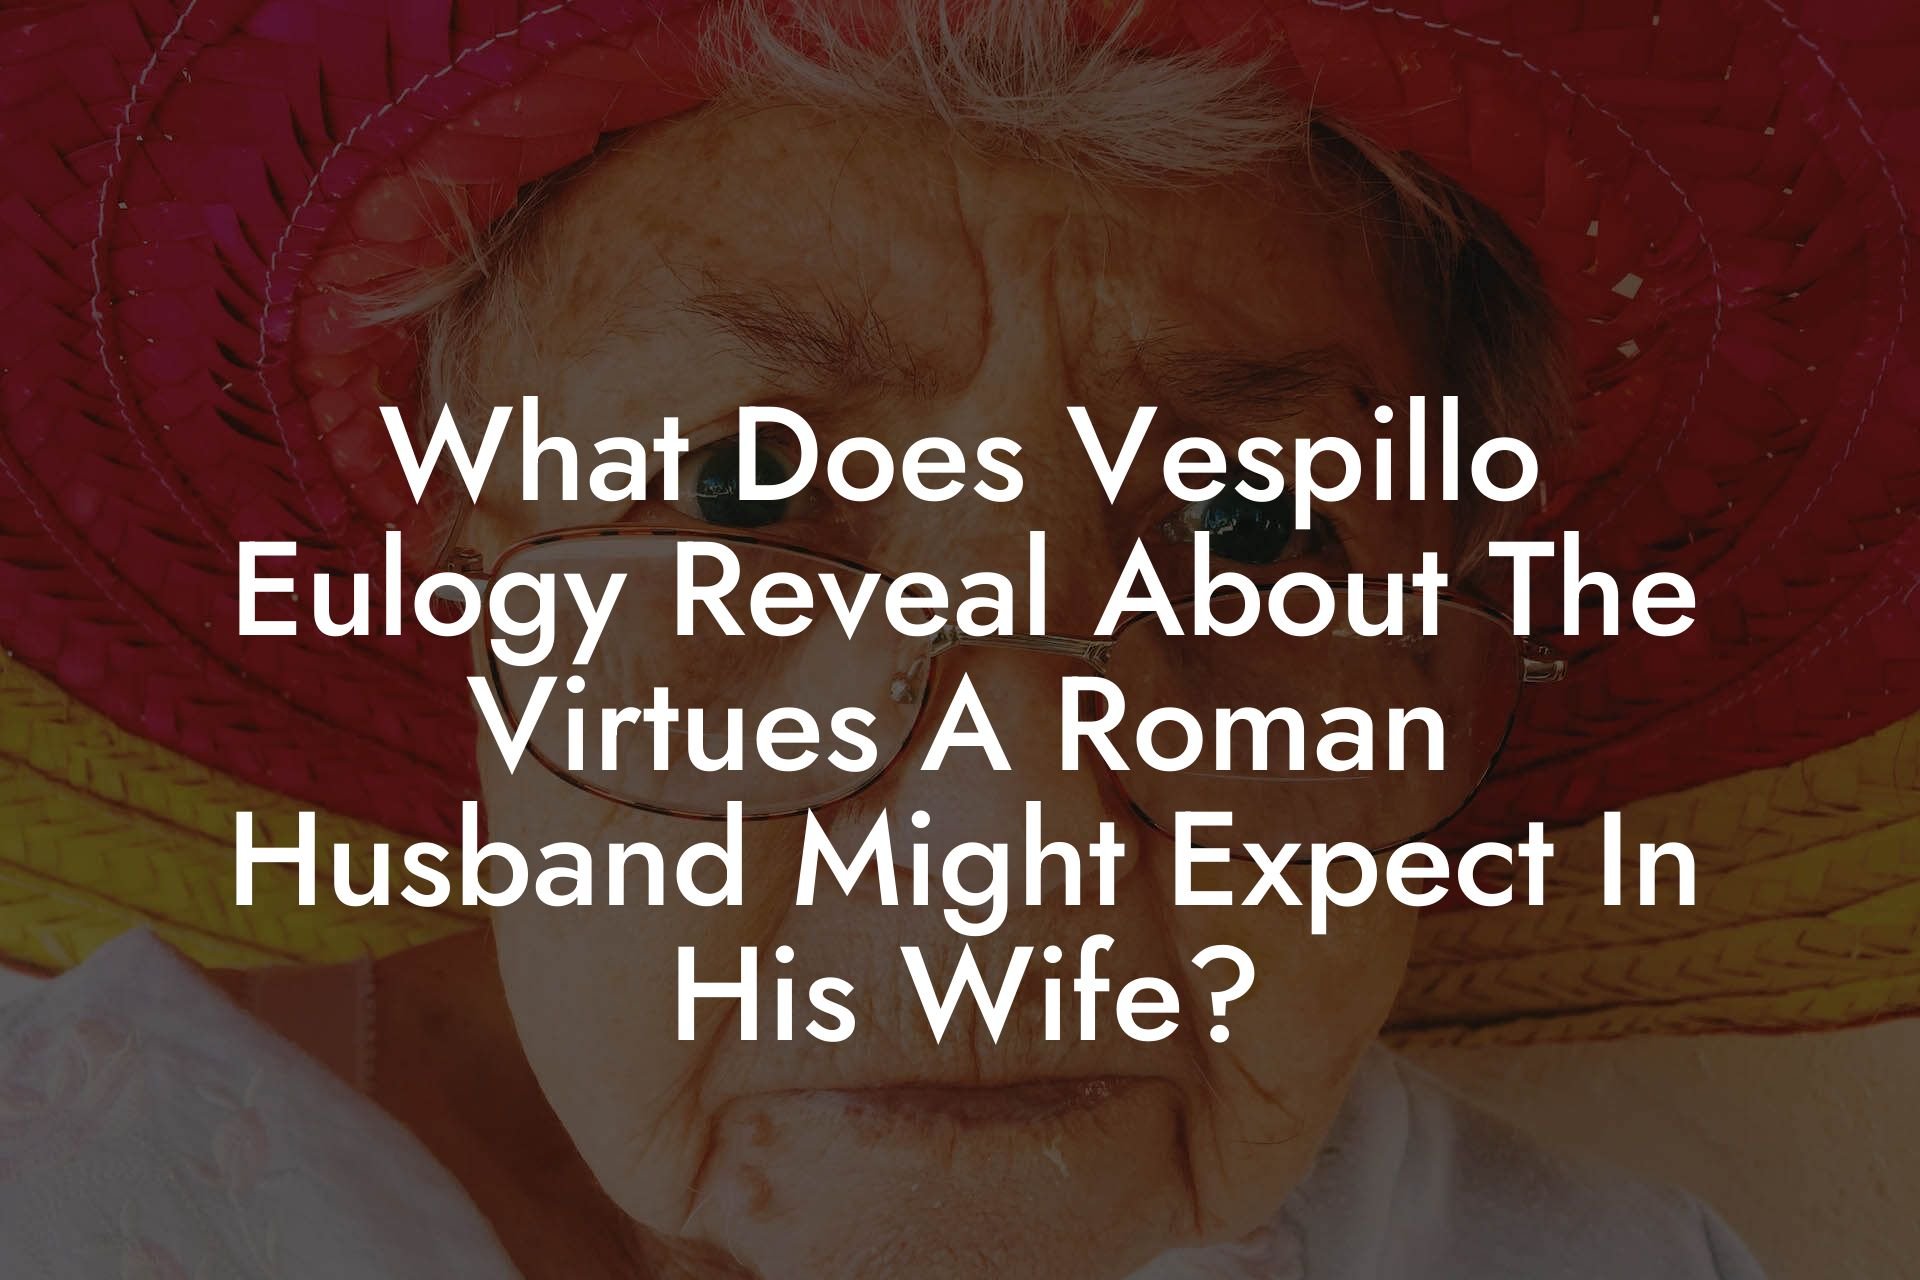 What Does Vespillo Eulogy Reveal About The Virtues A Roman Husband Might Expect In His Wife